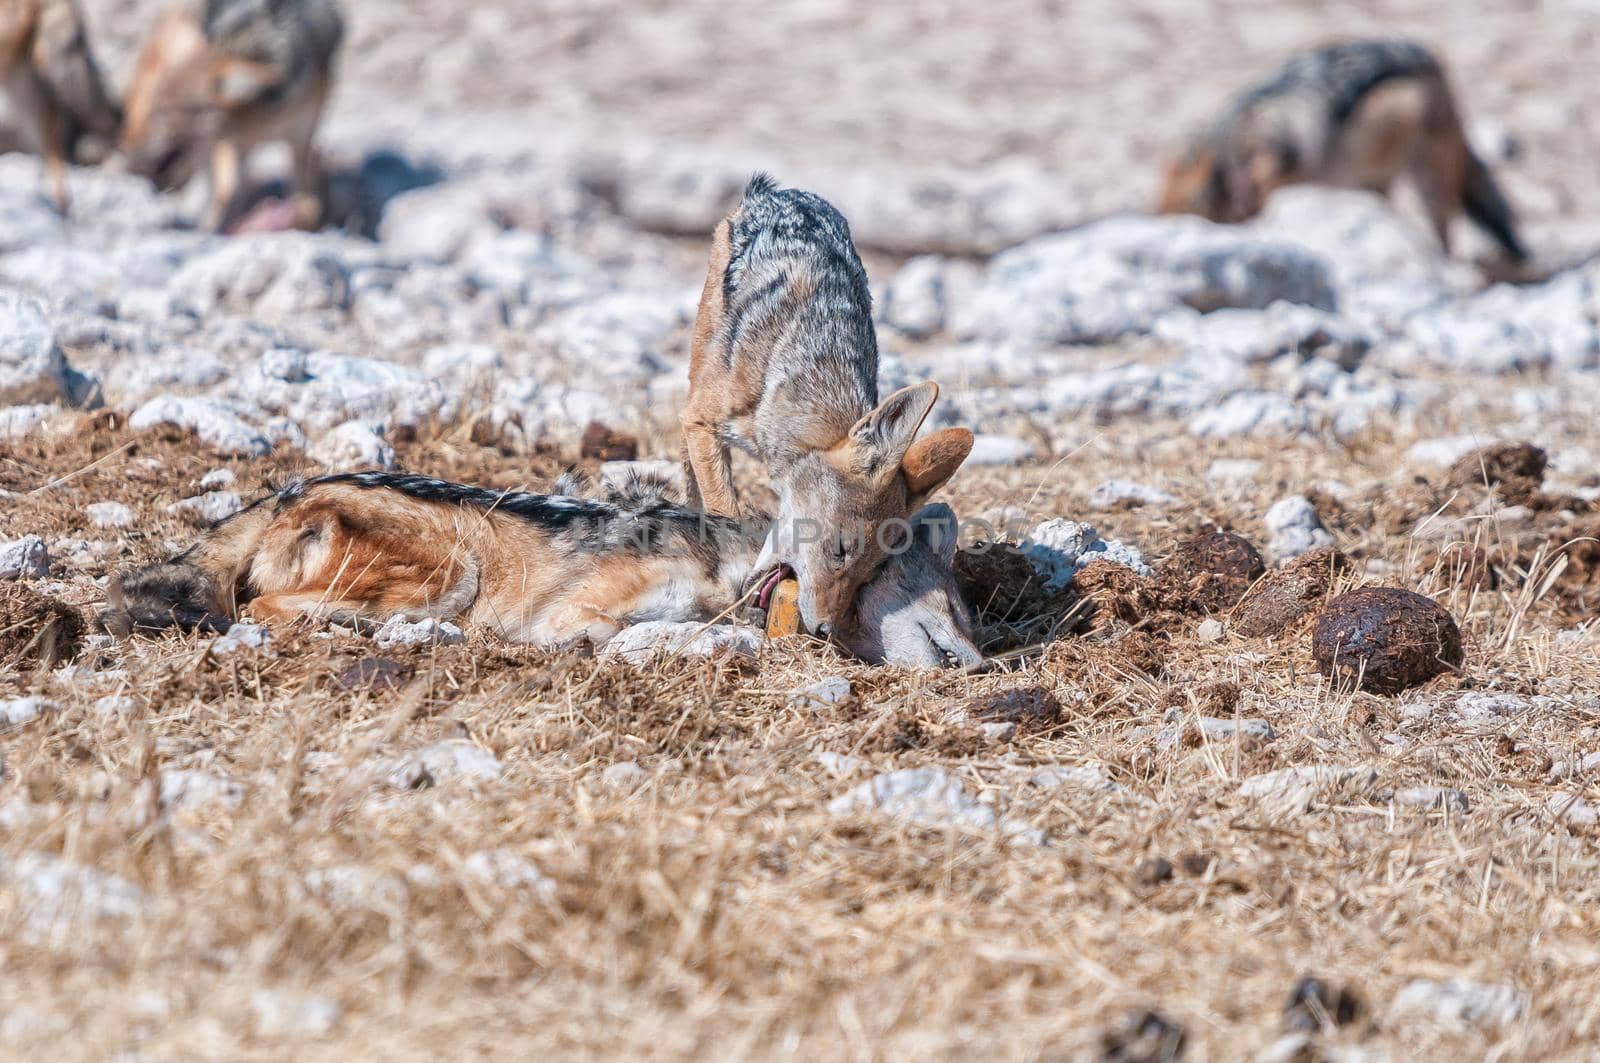 A dead black-backed jackal, Canis mesomelas, with another jackal biting its tracking collar